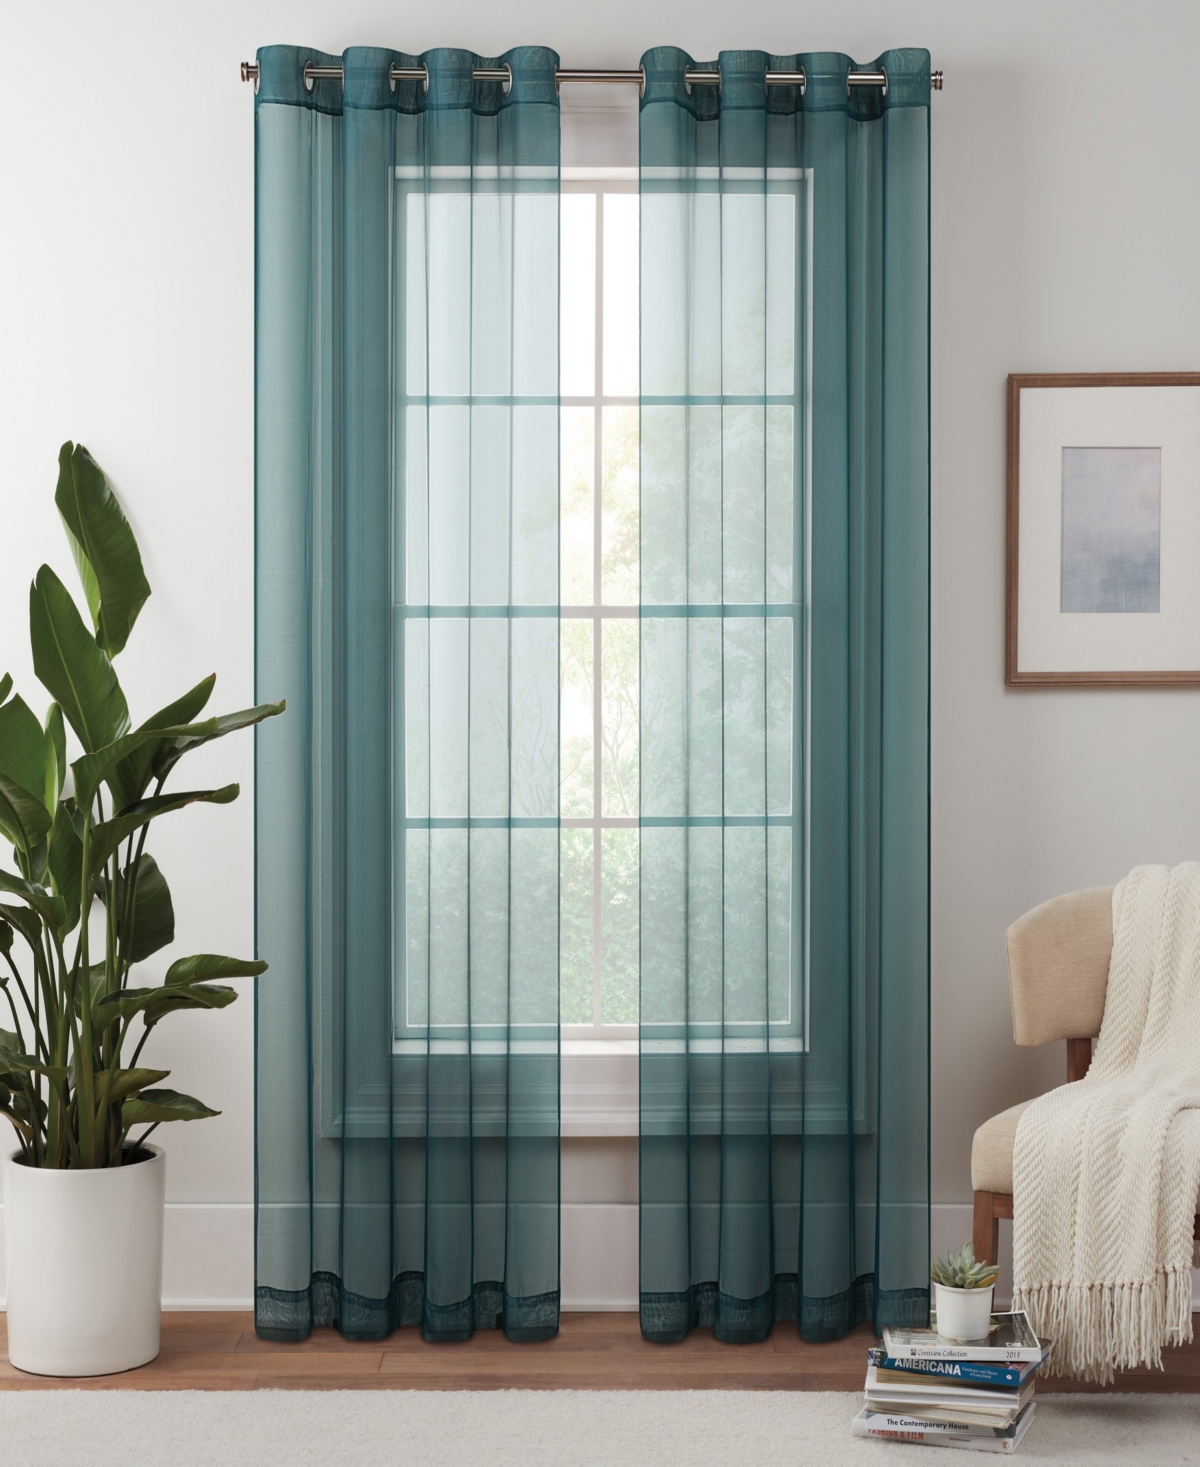 Eclipse Livia Sheer Voile Grommet Curtain Panel, 54" X 84" In Teal